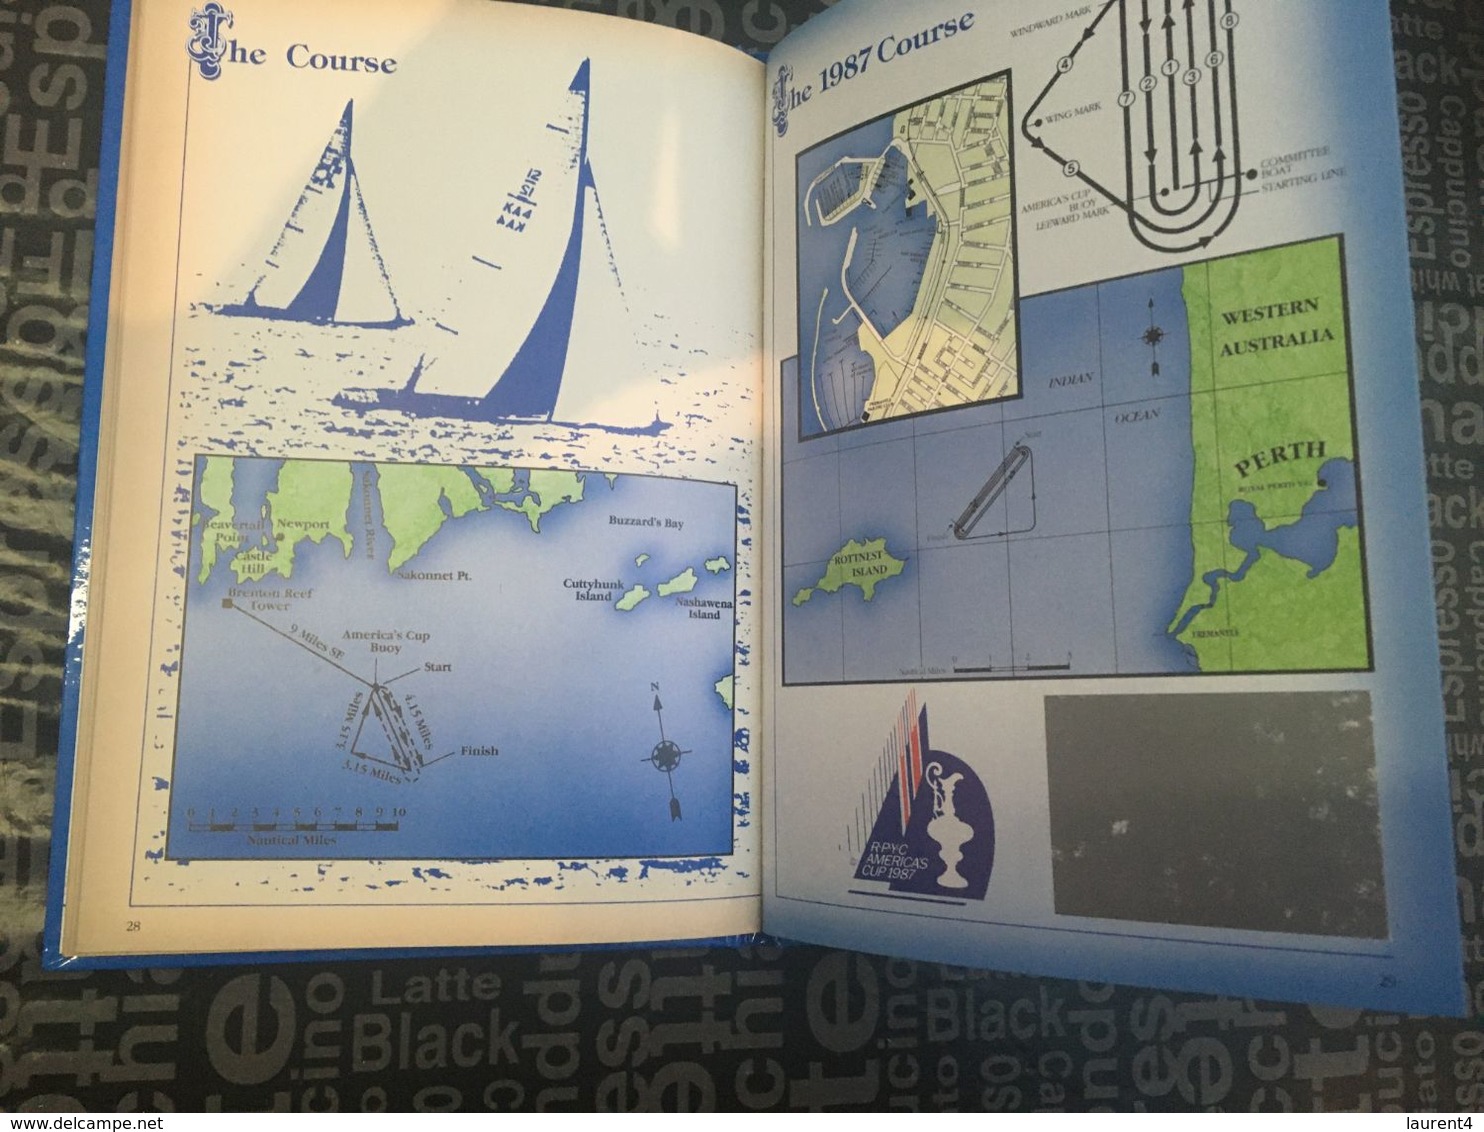 (Book 7-8-2020) edited in Perth, Australia - America's Cup - (NO stamps in book / sans timbres) see many photos (300g)